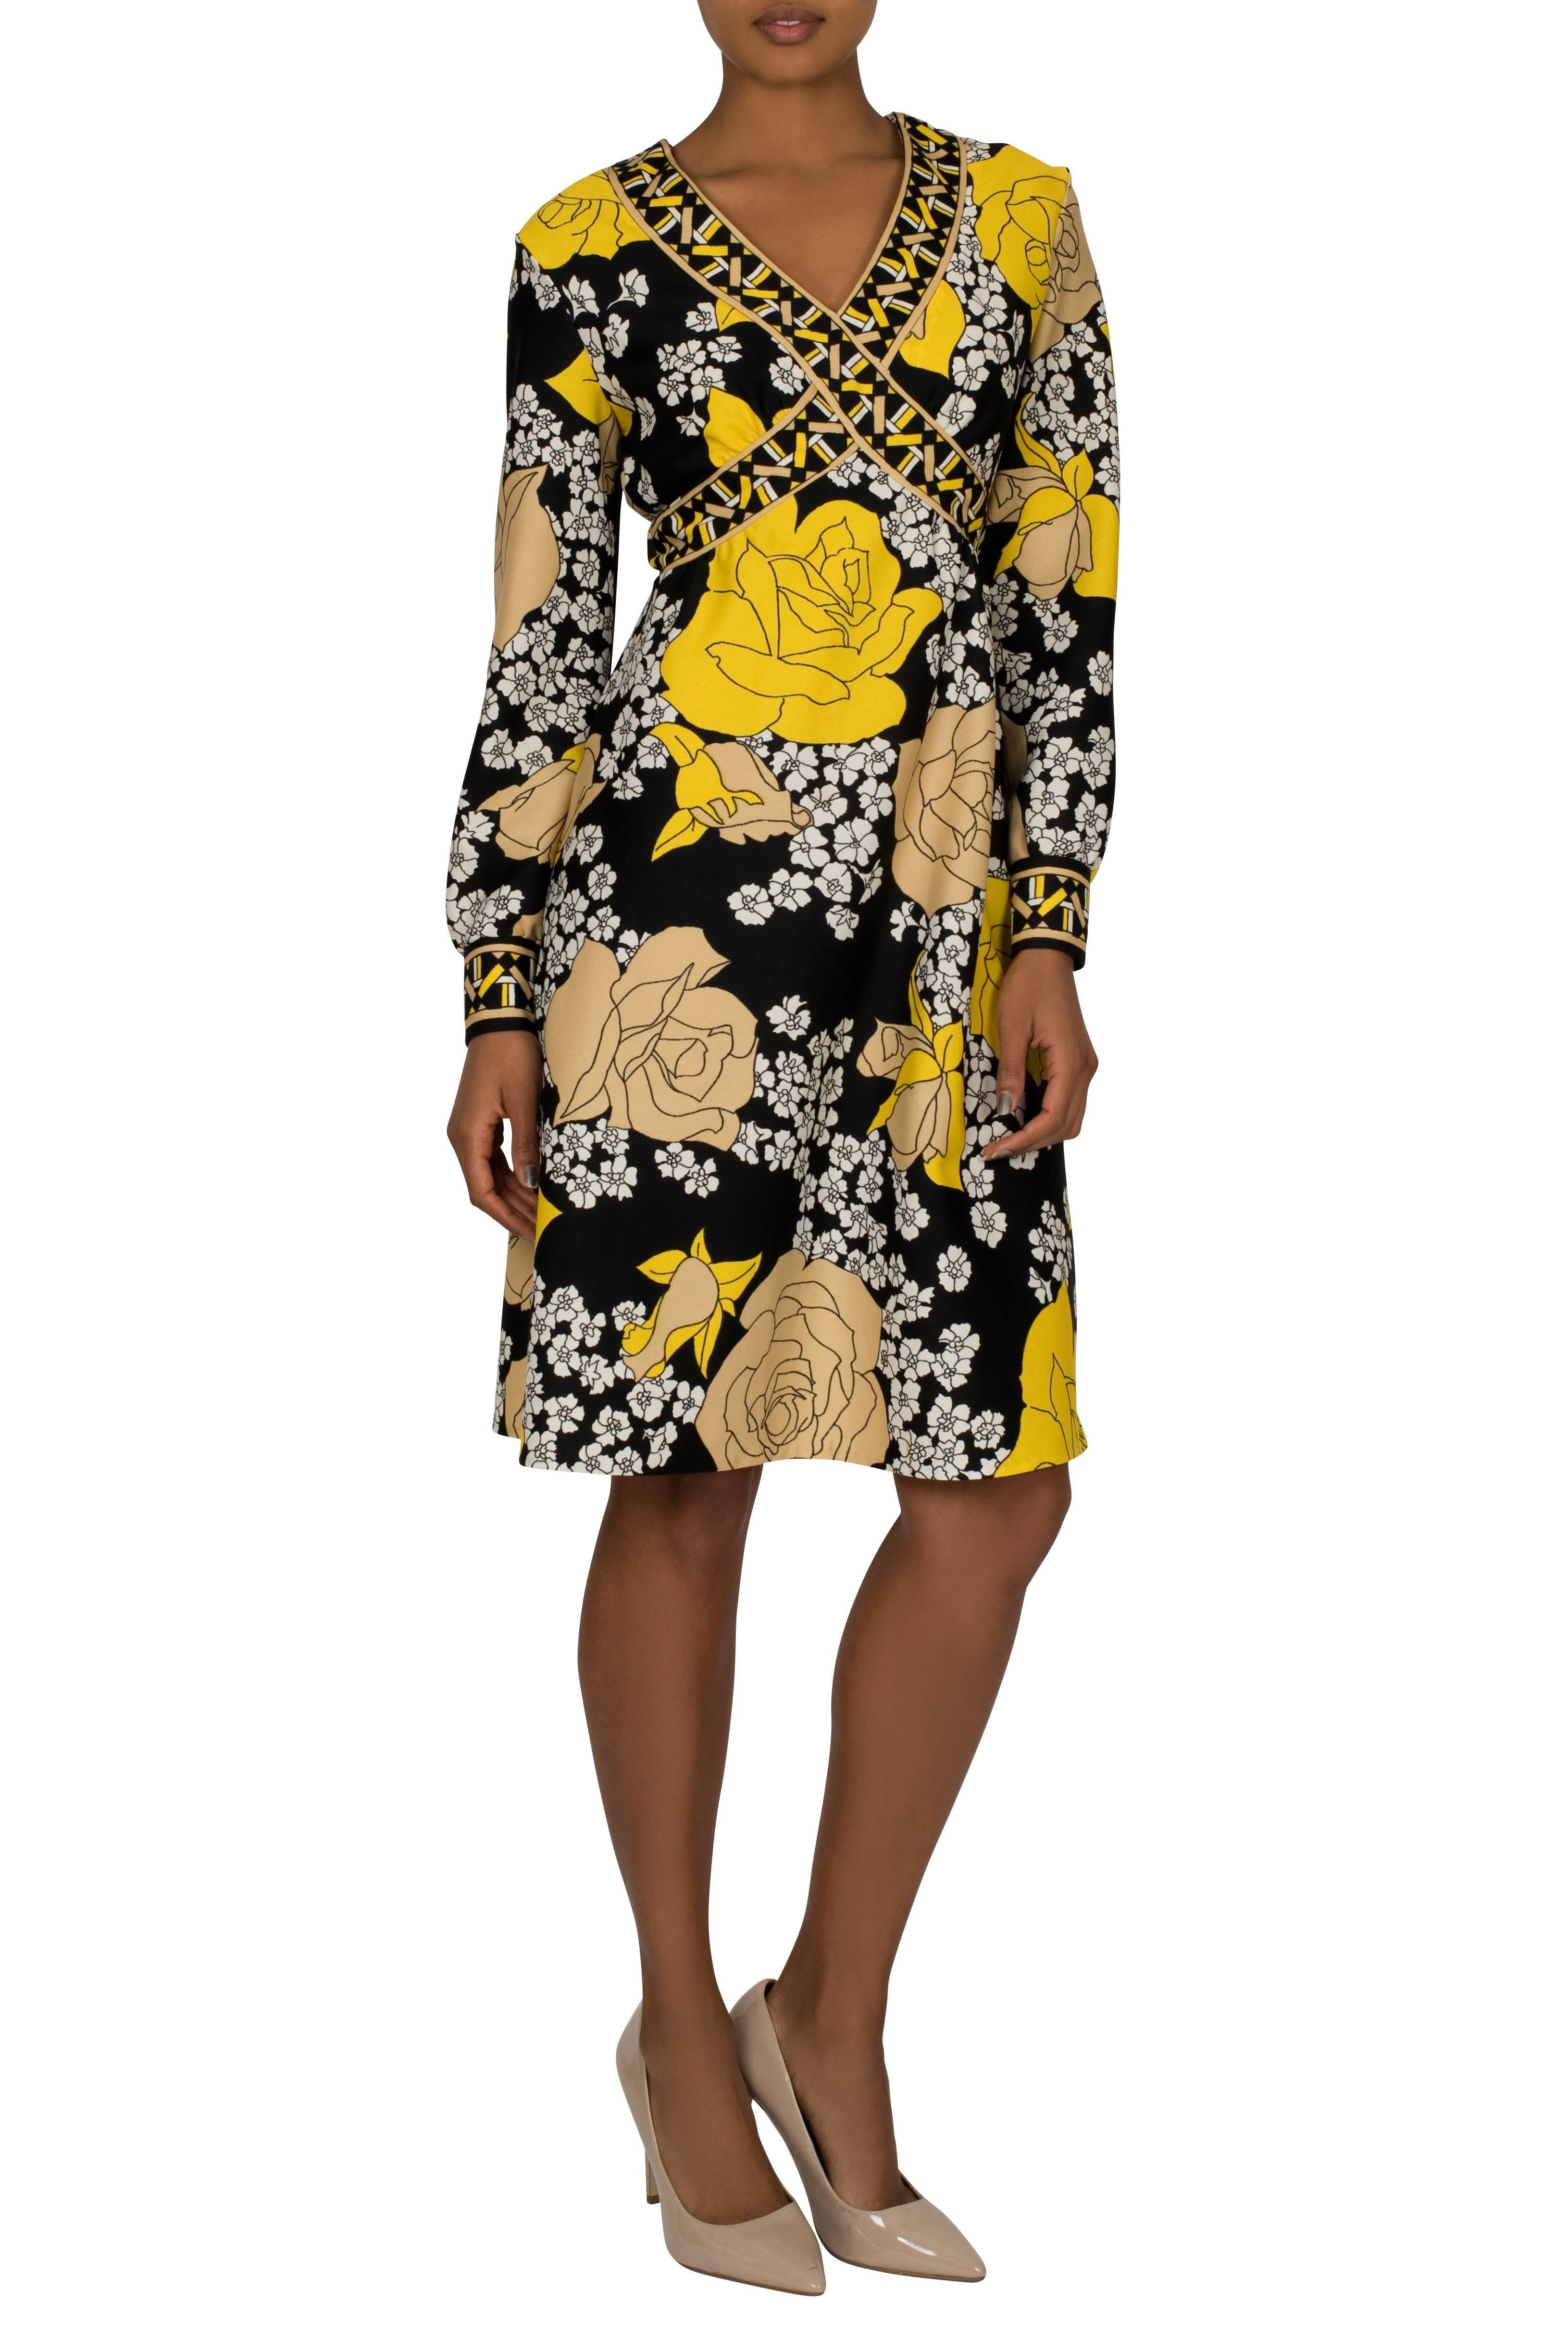 A 1970's yellow and black geometric floral mini dress by Nancy Valentine. The flattering decolletage is adorned with a band featuring a Greek frieze pattern, which crosses under the bust and encircles the back. It has full length puffed sleeves and